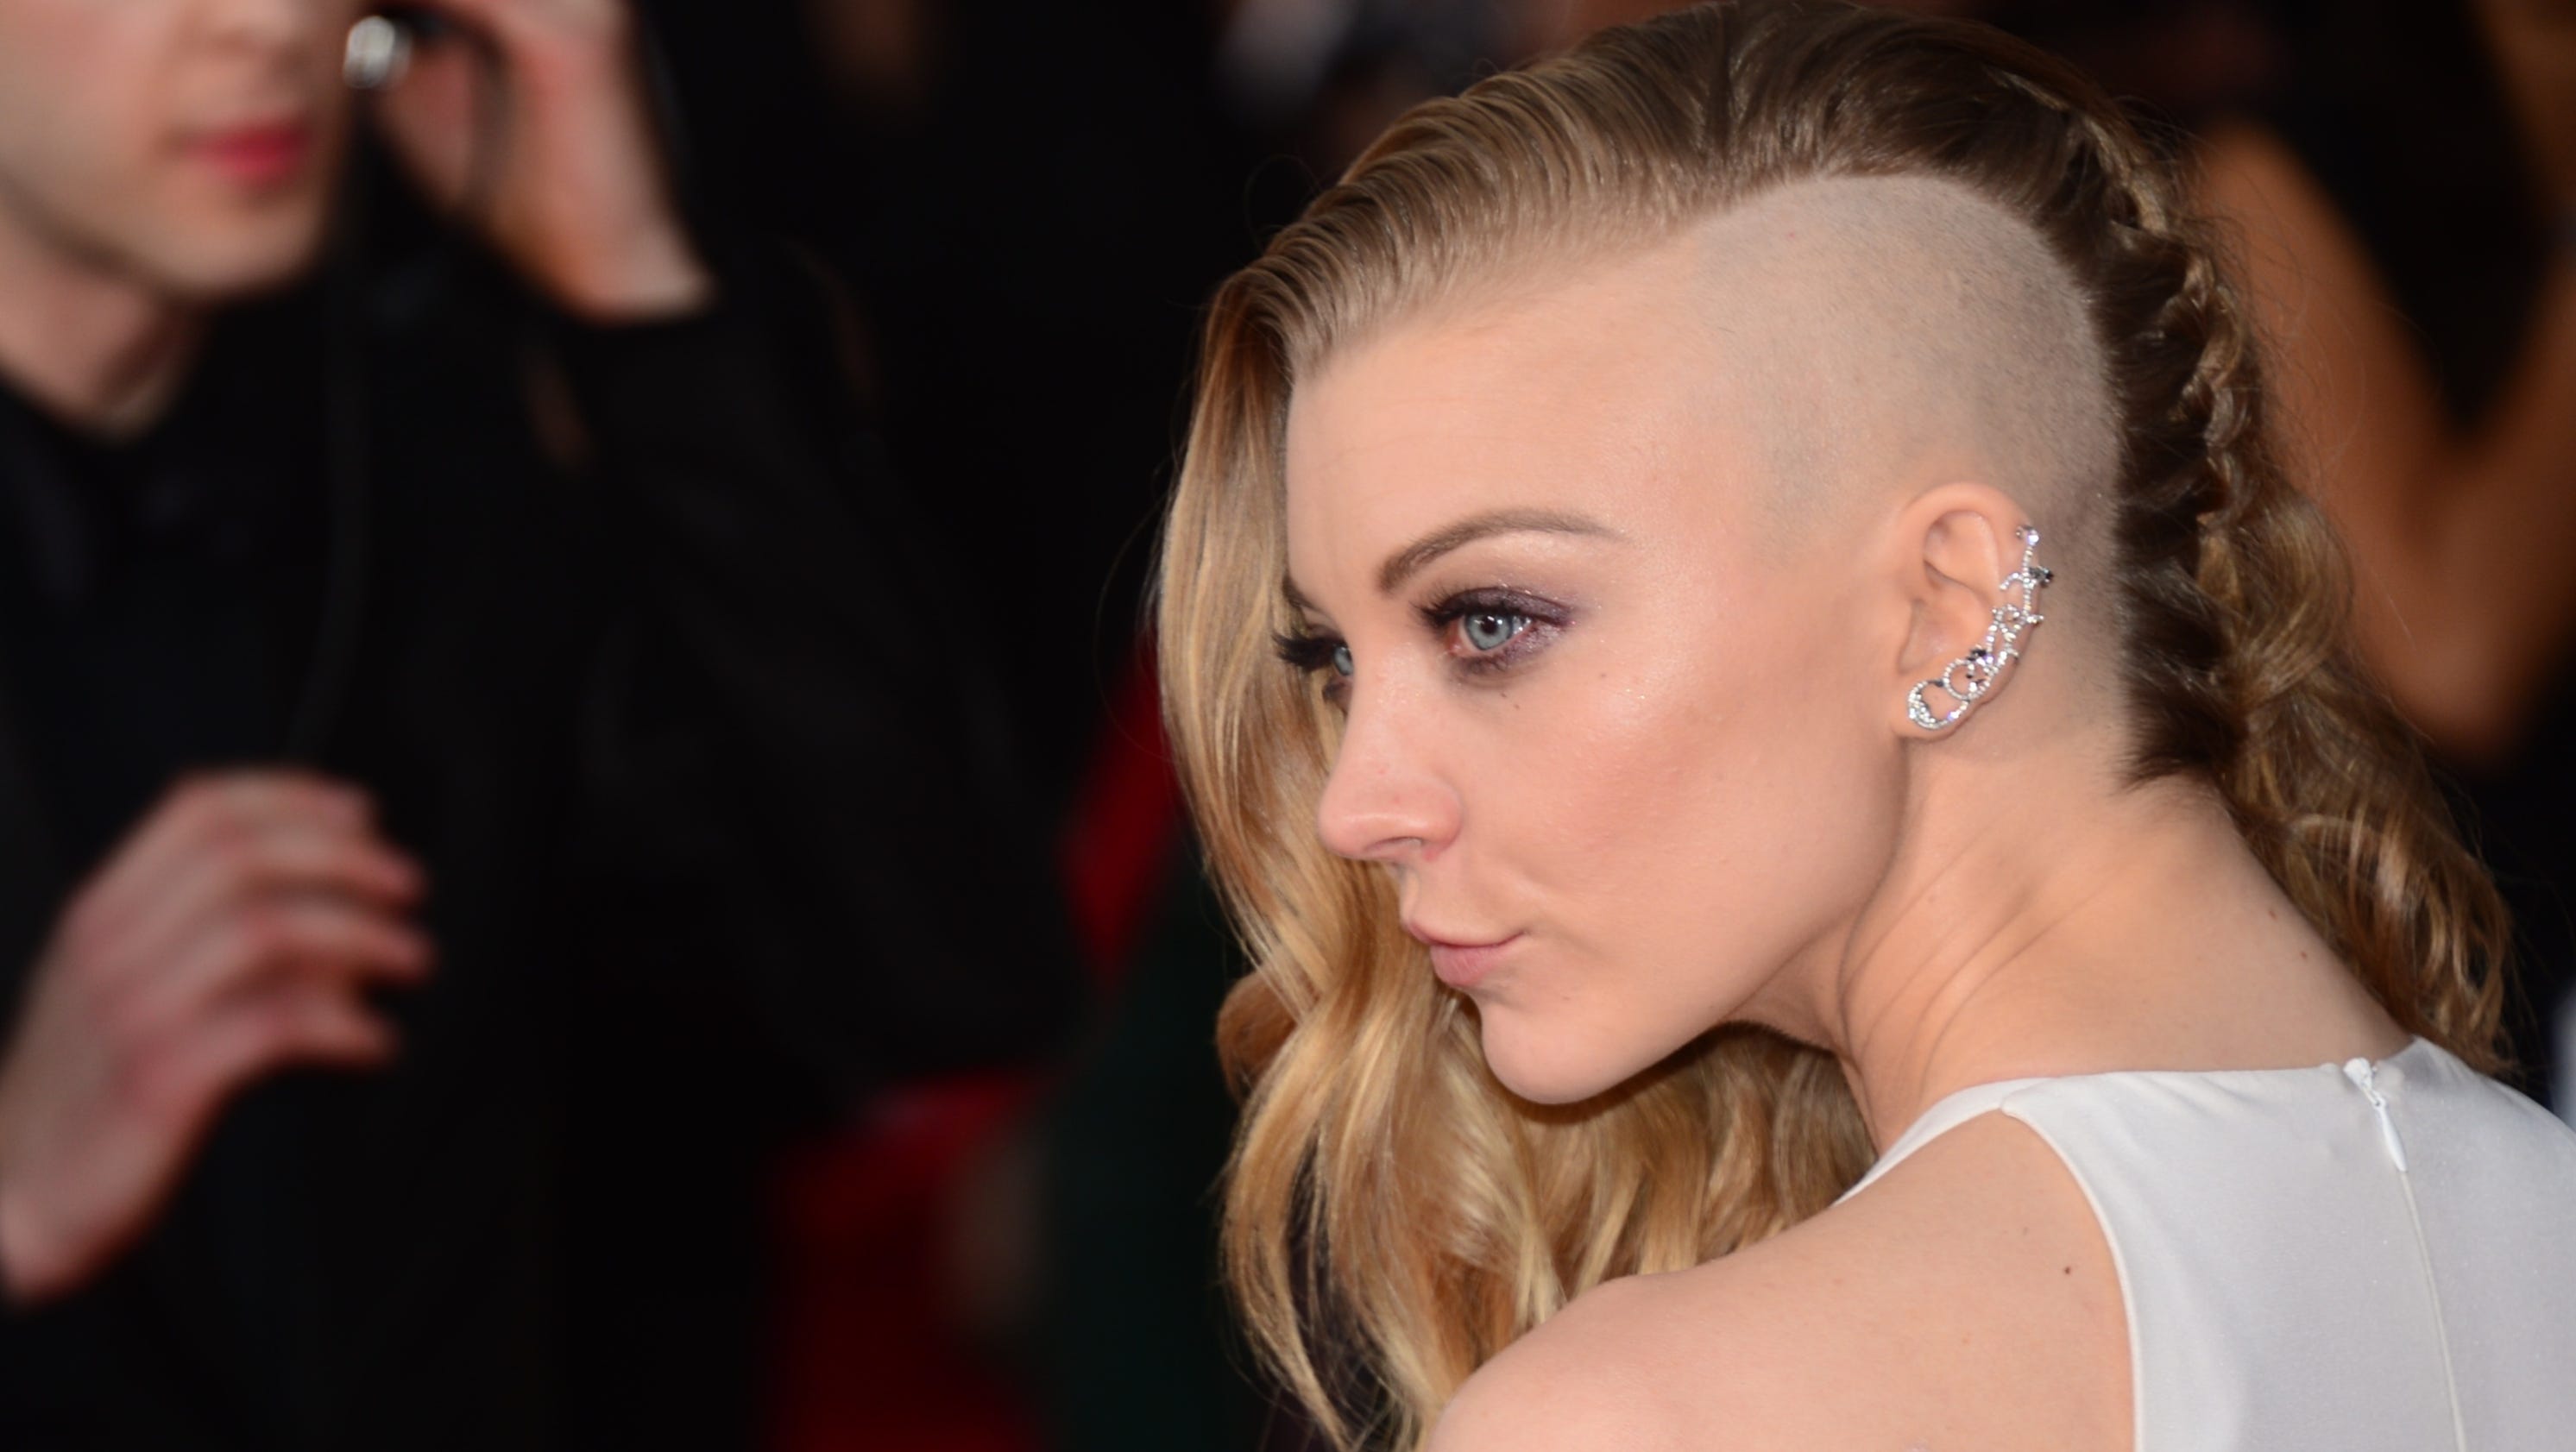 Natalie Dormer Goes To Sag Awards With A Shaved Head 